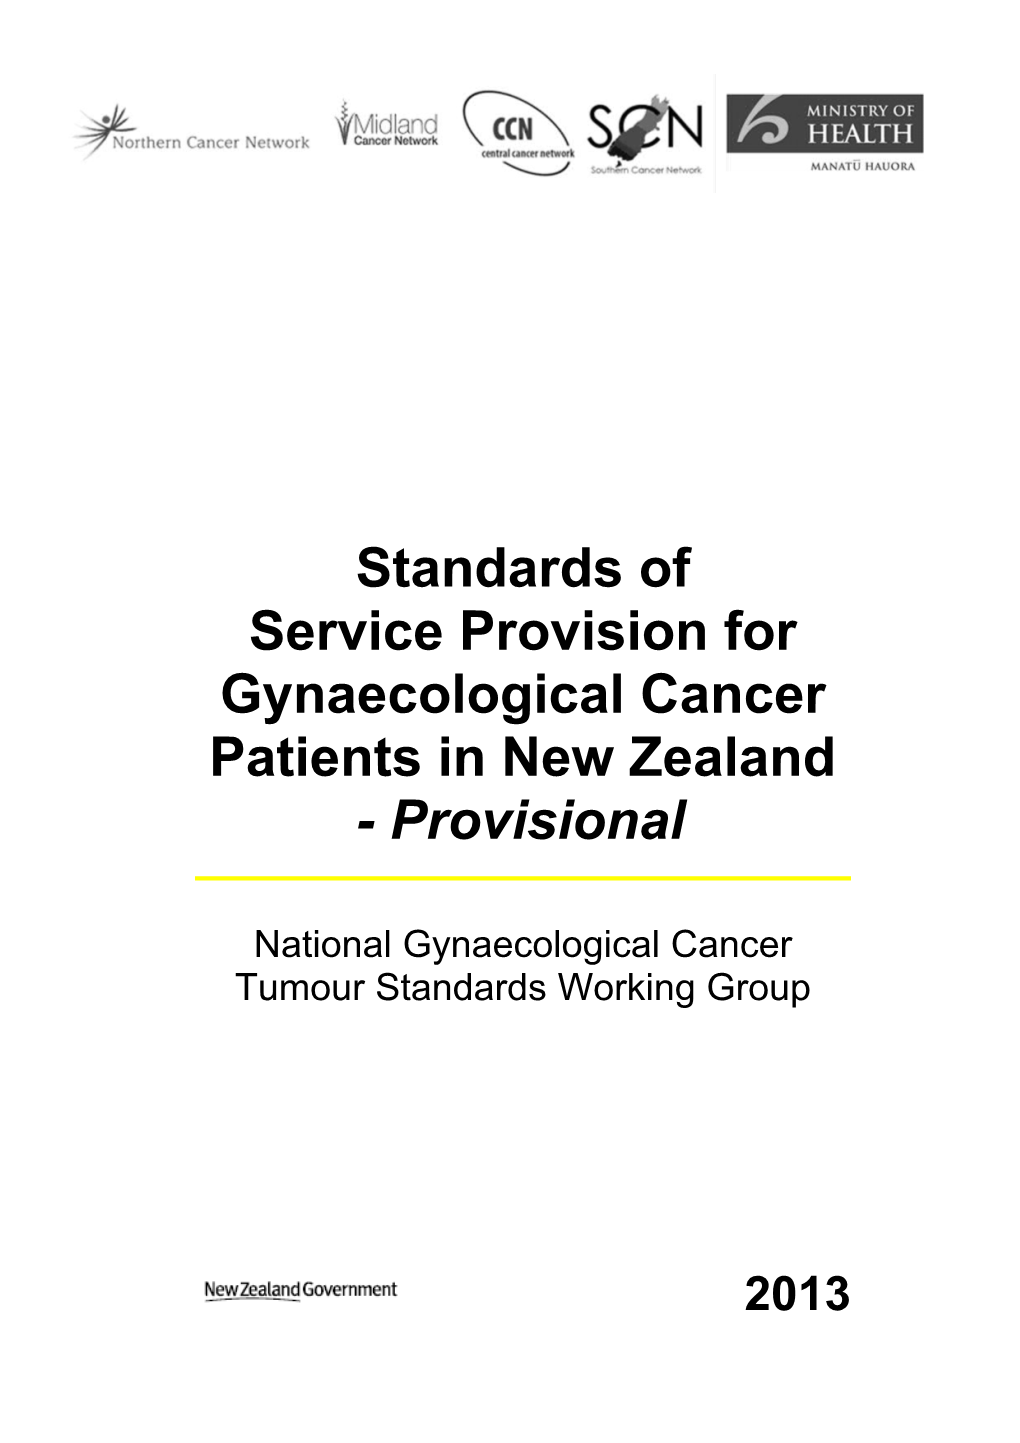 Standards-Of-Service-Provision-Gynaecological-Cancer-Patients-Dec13